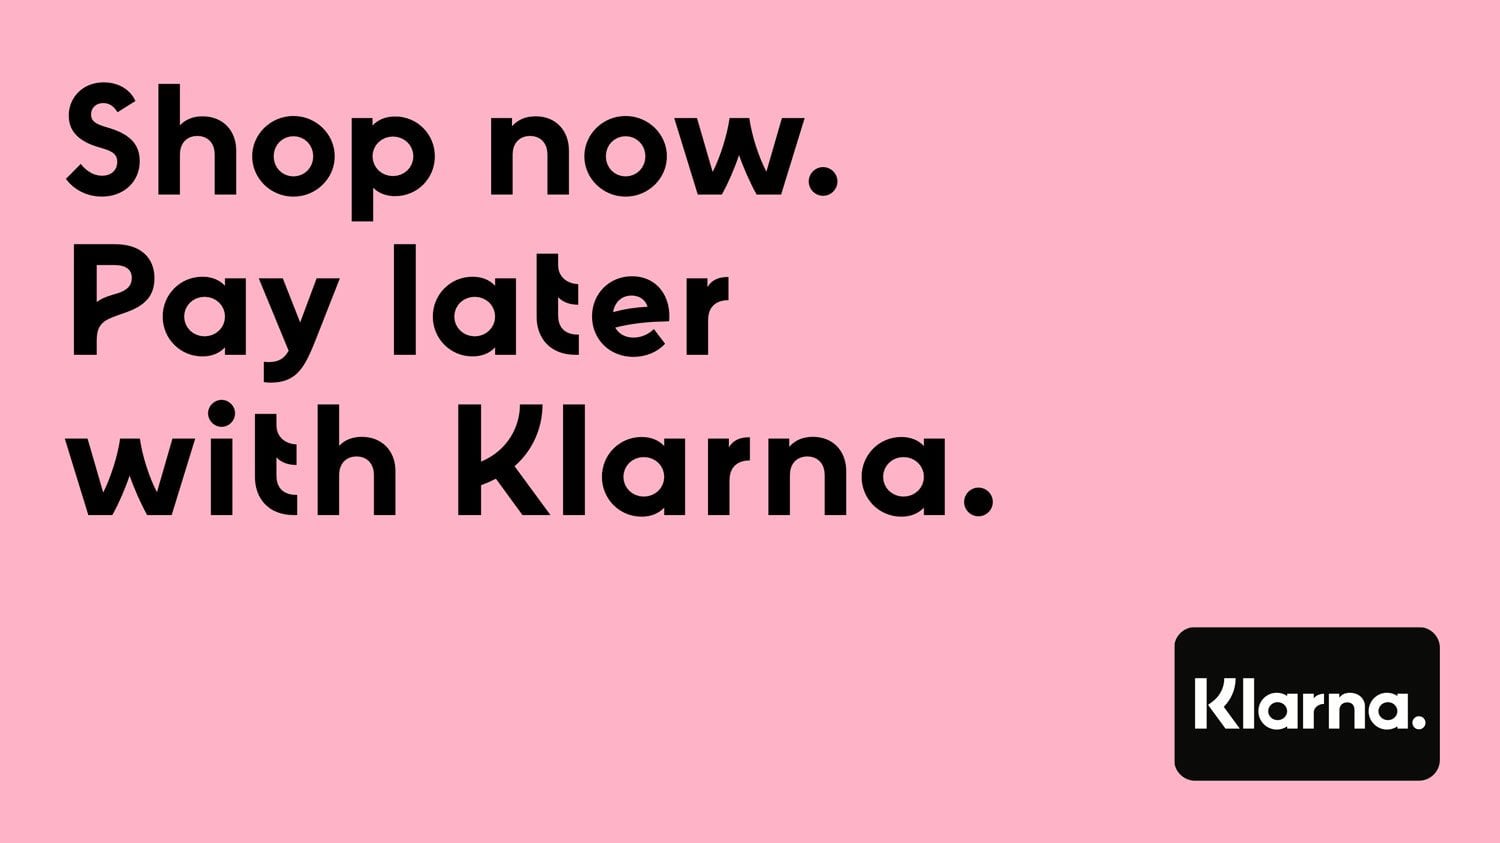 Pay for your online purchases using Klarna